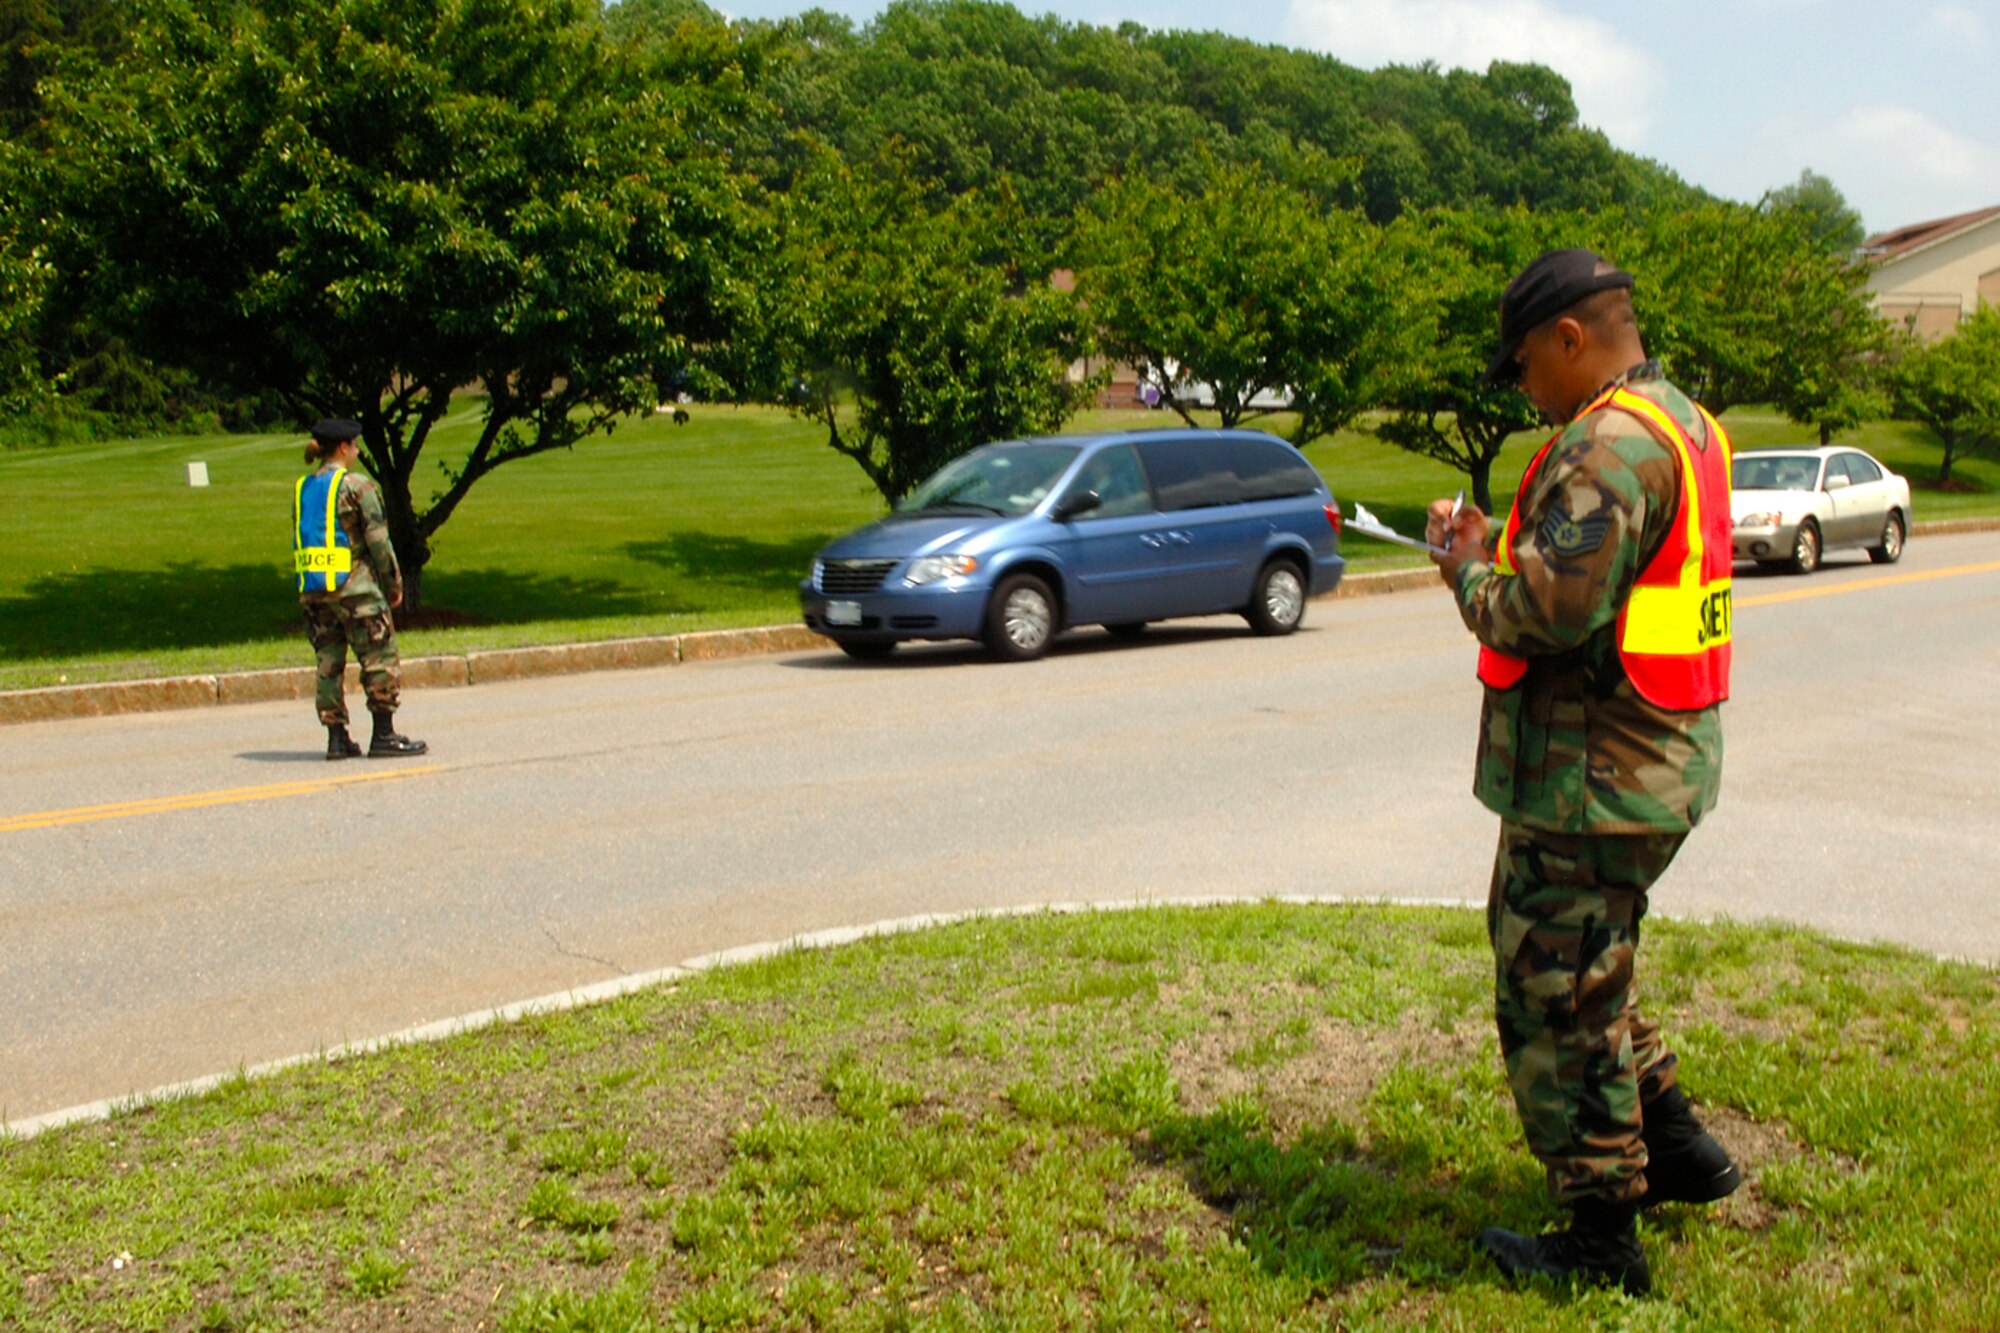 HANSCOM AFB, Mass., -- Members of the 66th Security Forces Squadron check base drivers’ safety belt usage during a ‘Click it or Ticket’ event during June. During the check, four base motorists were cited for not wearing safety belts. Drivers are reminded to wear safety belts and not talk on their cell phones while driving. (U.S. Air Force photo by Jan Abate)